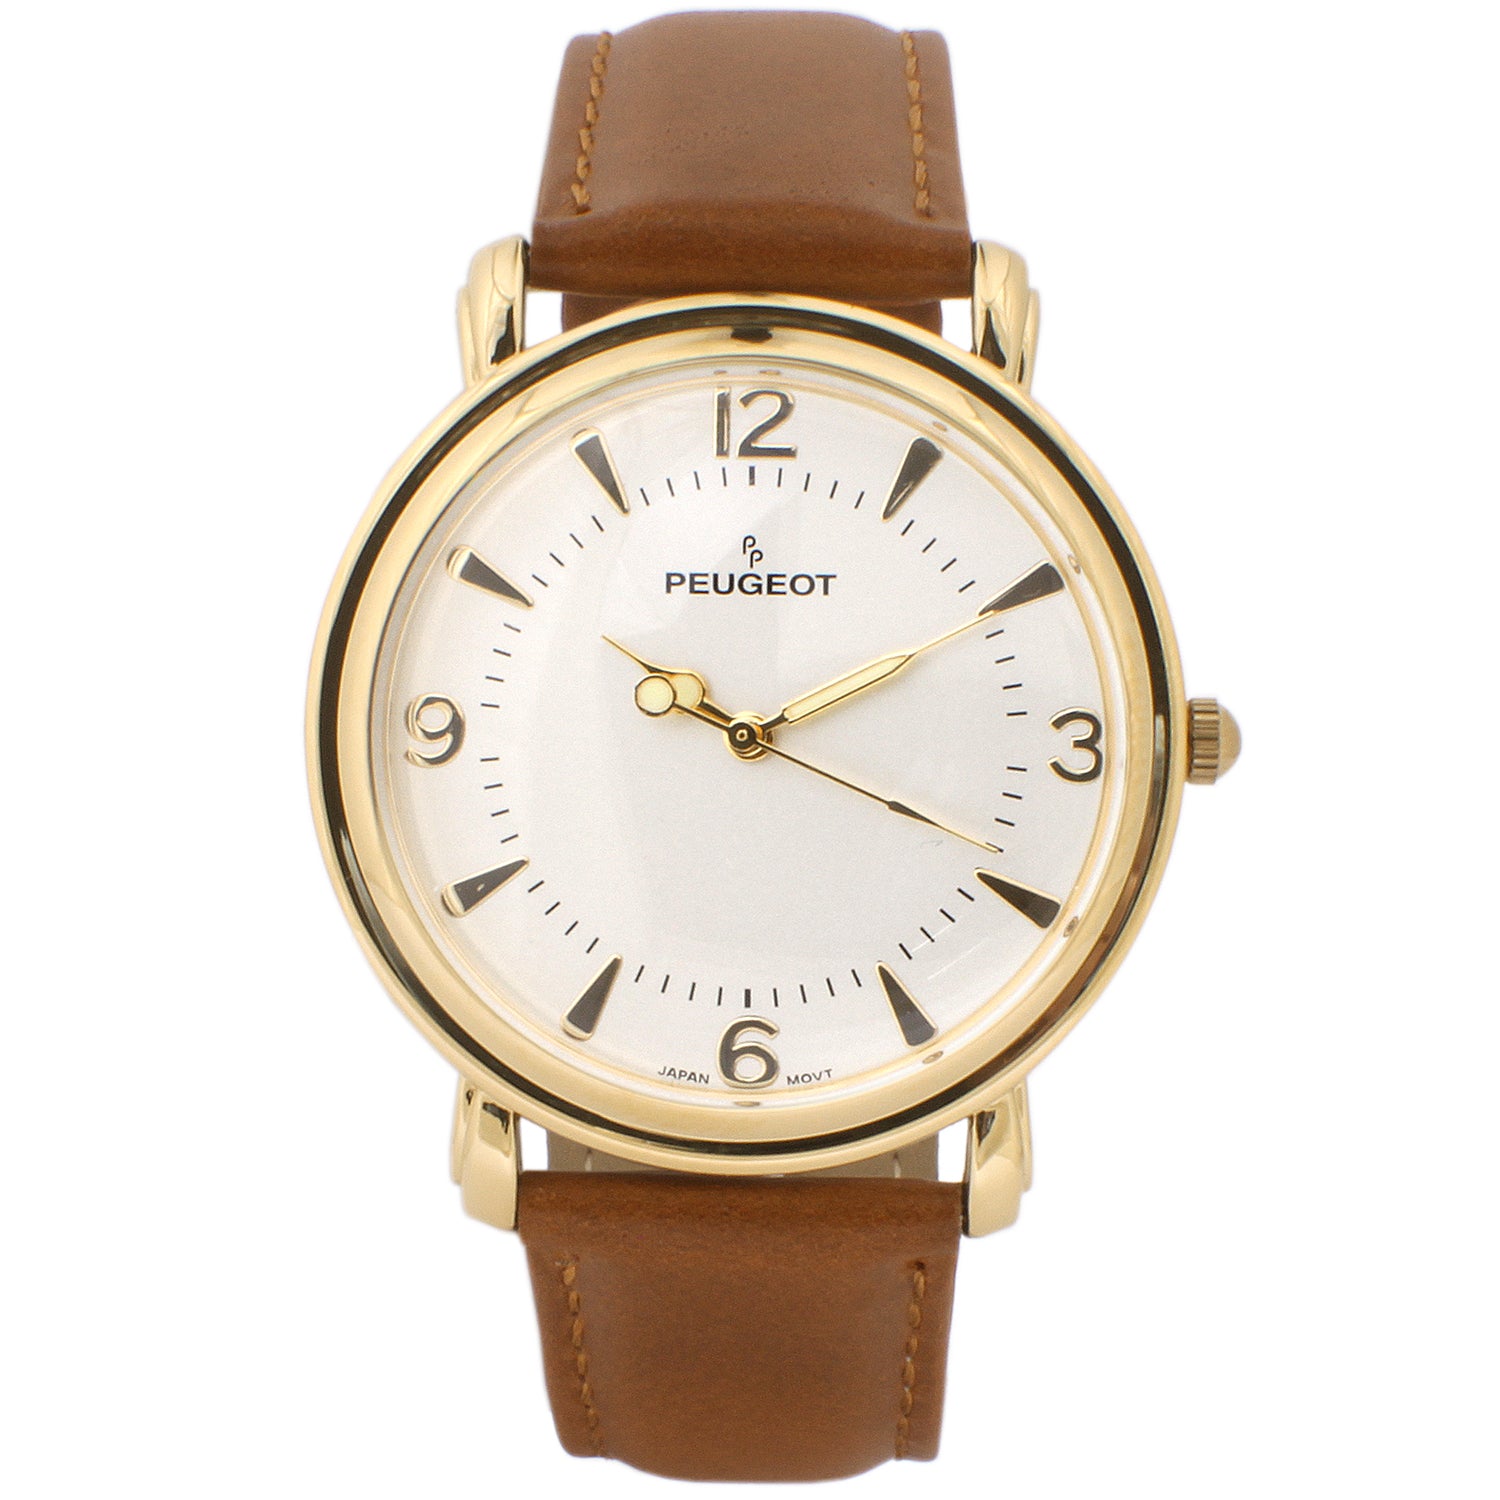 Peugeot Men's Watch Round Gold Silver Dial with Tan Leather Strap